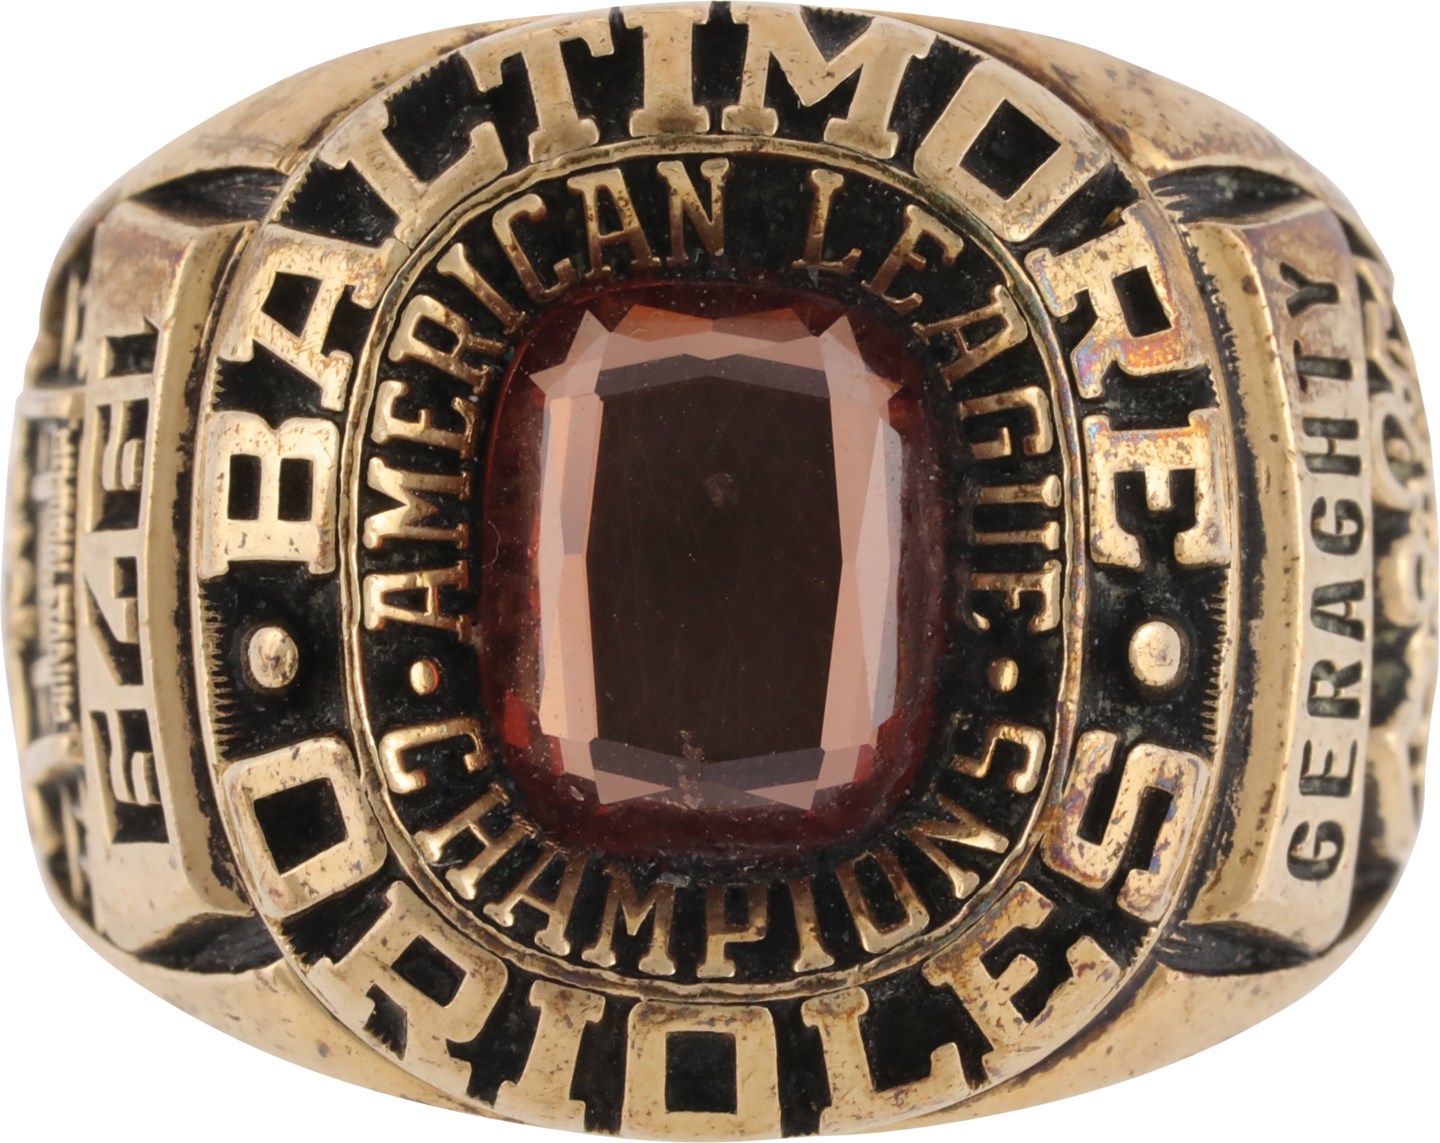 - 1979 Baltimore Orioles American League Championship Ring